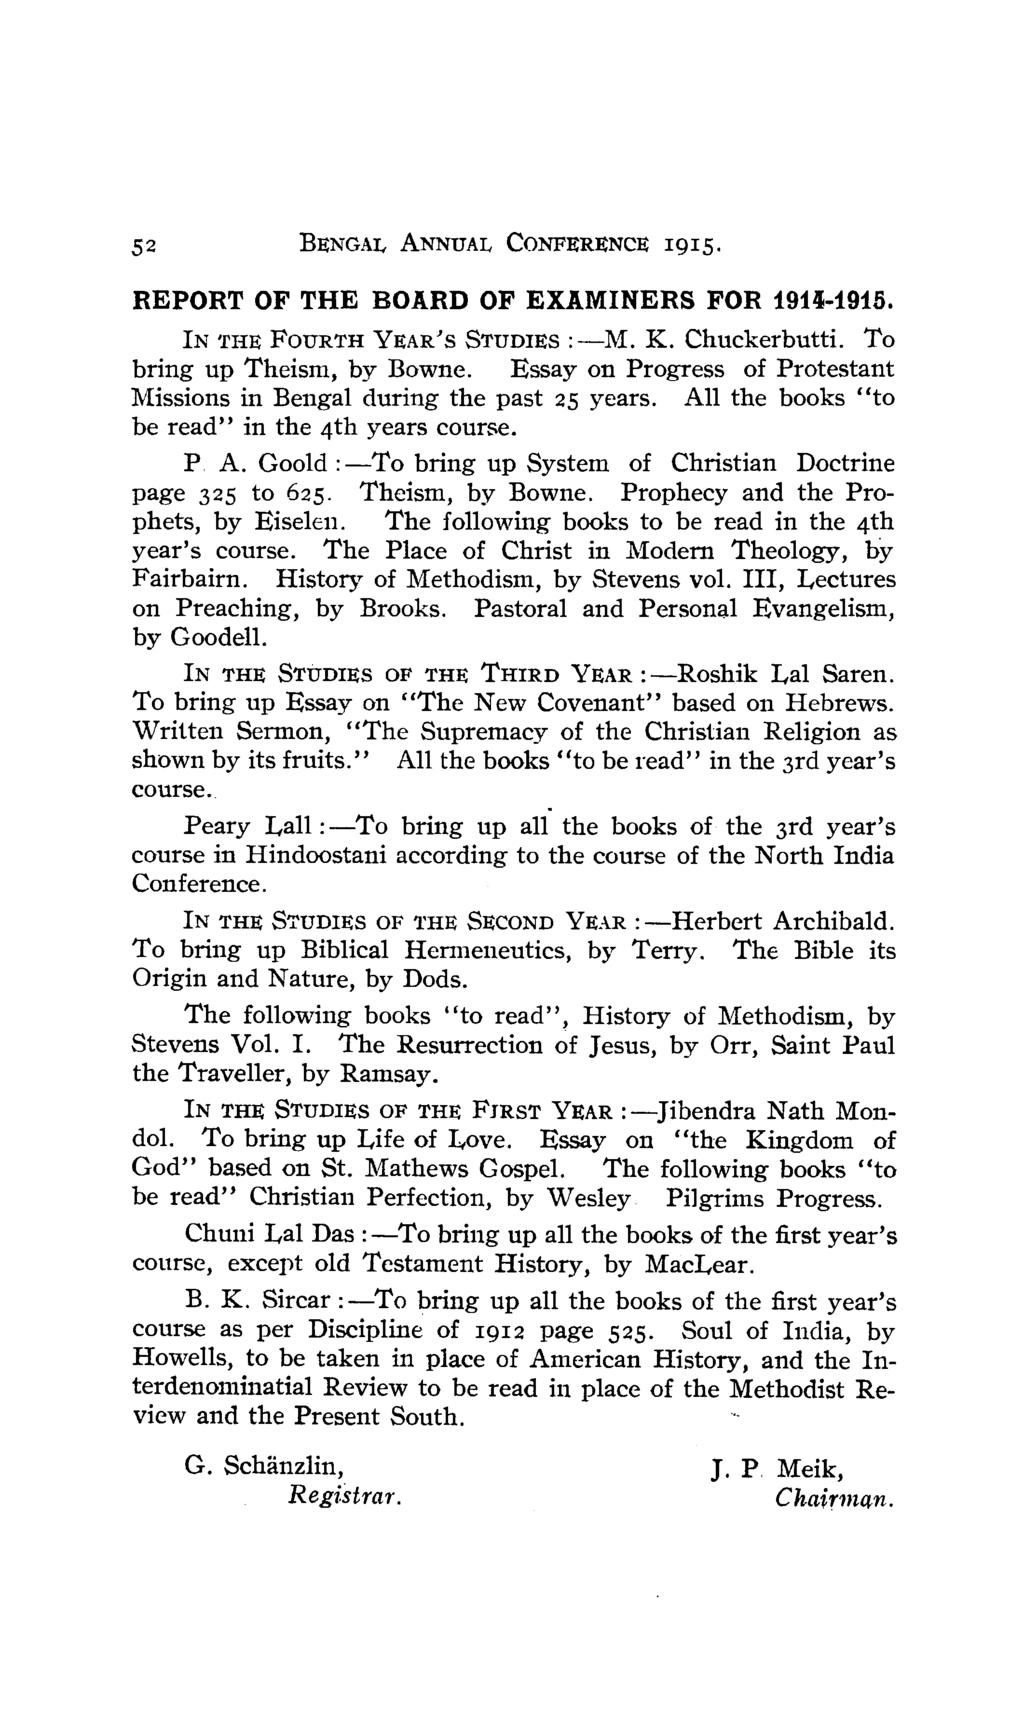 52 BENGAL ANNUAL CONFERENCE 1915. REPORT OF THE BOARD OF EXAMNERS FOR 1914-1915. N 'fhe FOURTH YEARJS STUDES :-M. K. Chuckerbutti. To bring up Theism, by Bowne.